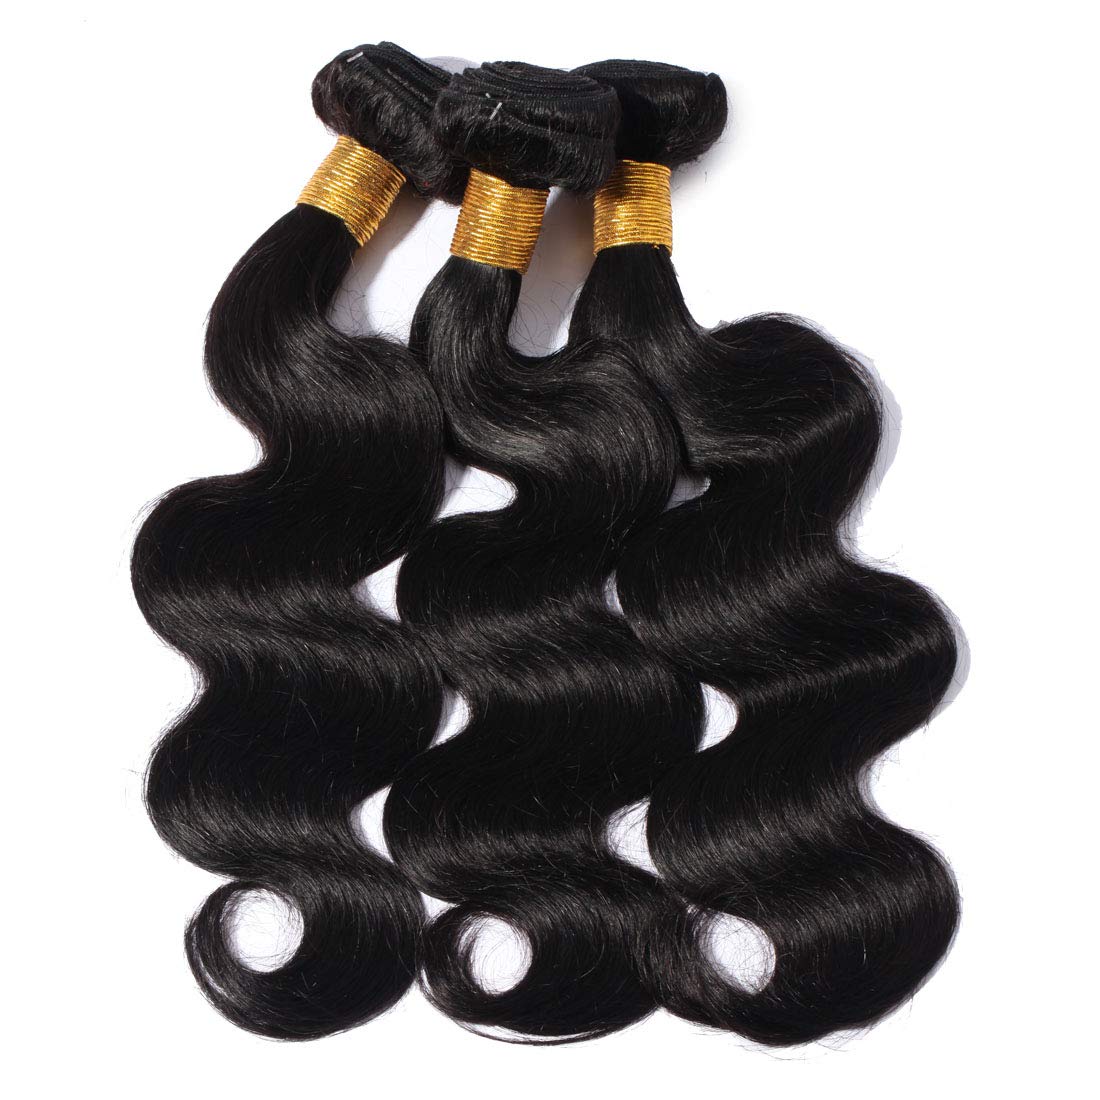 Virgin Hair Weft Weave Extensions Thick Body Wave Wavy One Bundle for Women Platinum Blonde 100g